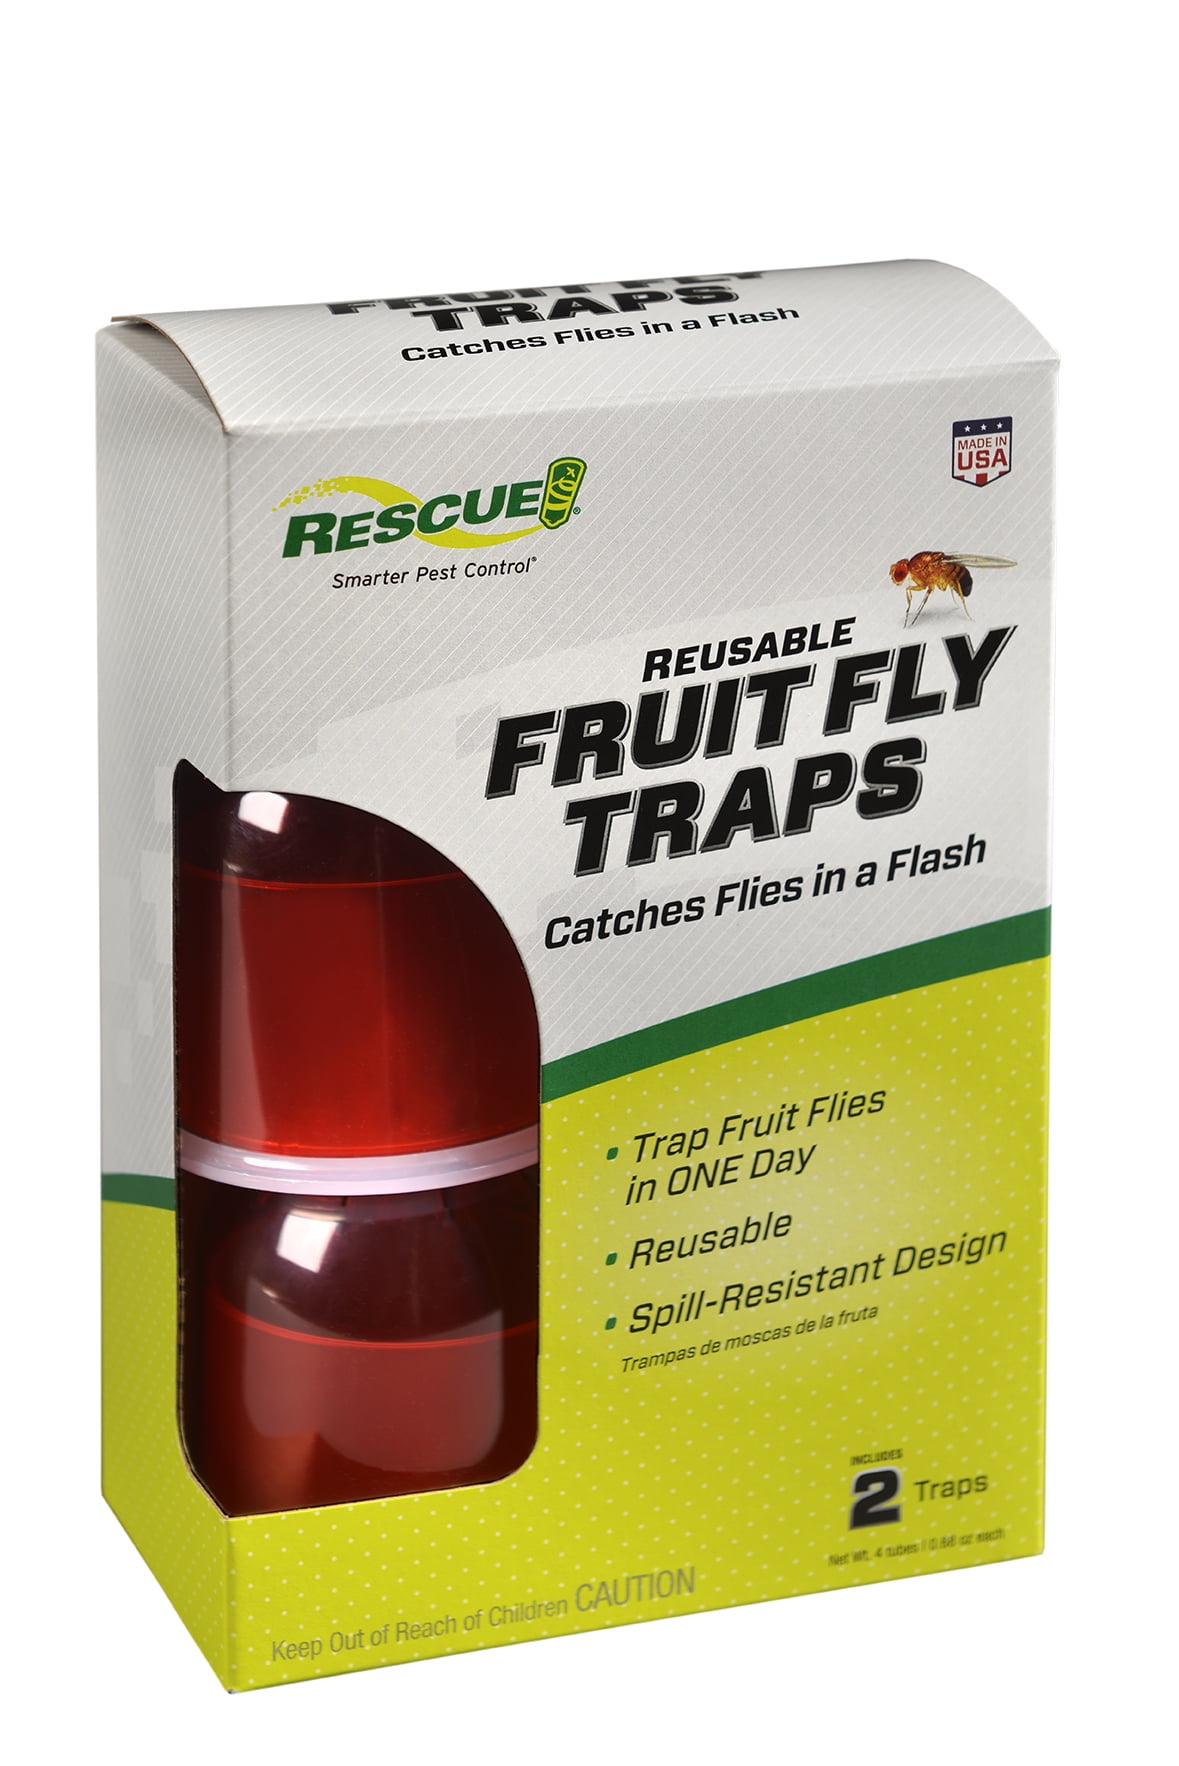 RESCUE! Reusable Indoor Fruit Fly Trap, 2 Pack